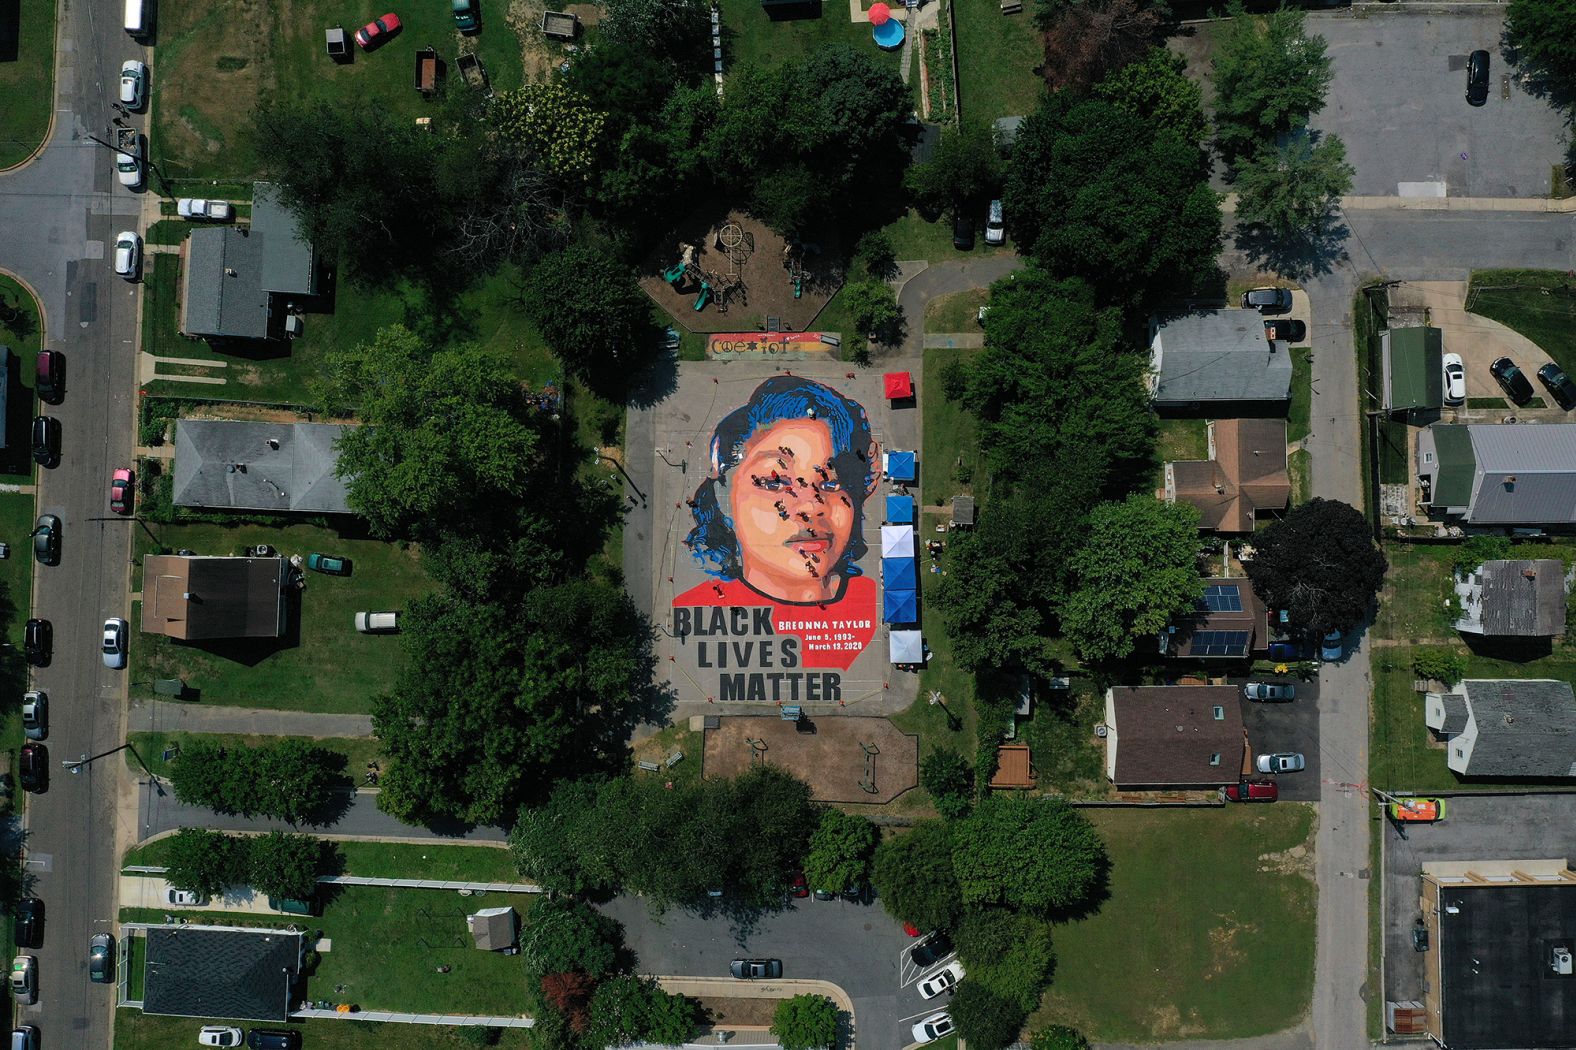 Artists and volunteers descended on a basketball court in a historically Black neighborhood of Annapolis, Maryland, <a href="index.php?page=&url=https%3A%2F%2Fwww.cnn.com%2F2020%2F07%2F06%2Fus%2Fbreonna-taylor-mural-trnd%2Findex.html" target="_blank">to paint a 7,000-square-foot mural of Breonna Taylor</a> over the Fourth of July weekend. The project was led by Annapolis-based Future History Now, a nonprofit art collective that creates murals with youth facing adversity in underserved communities. Taylor's death has become another flashpoint in national demonstrations over police brutality. <a href="index.php?page=&url=https%3A%2F%2Fwww.cnn.com%2F2020%2F06%2F05%2Fus%2Fbreonna-taylor-birthday-charges-arrests-case-trnd%2Findex.html" target="_blank">She was killed in March</a> by three Louisville, Kentucky, Metropolitan Police Department officers during the execution of a no-knock warrant.